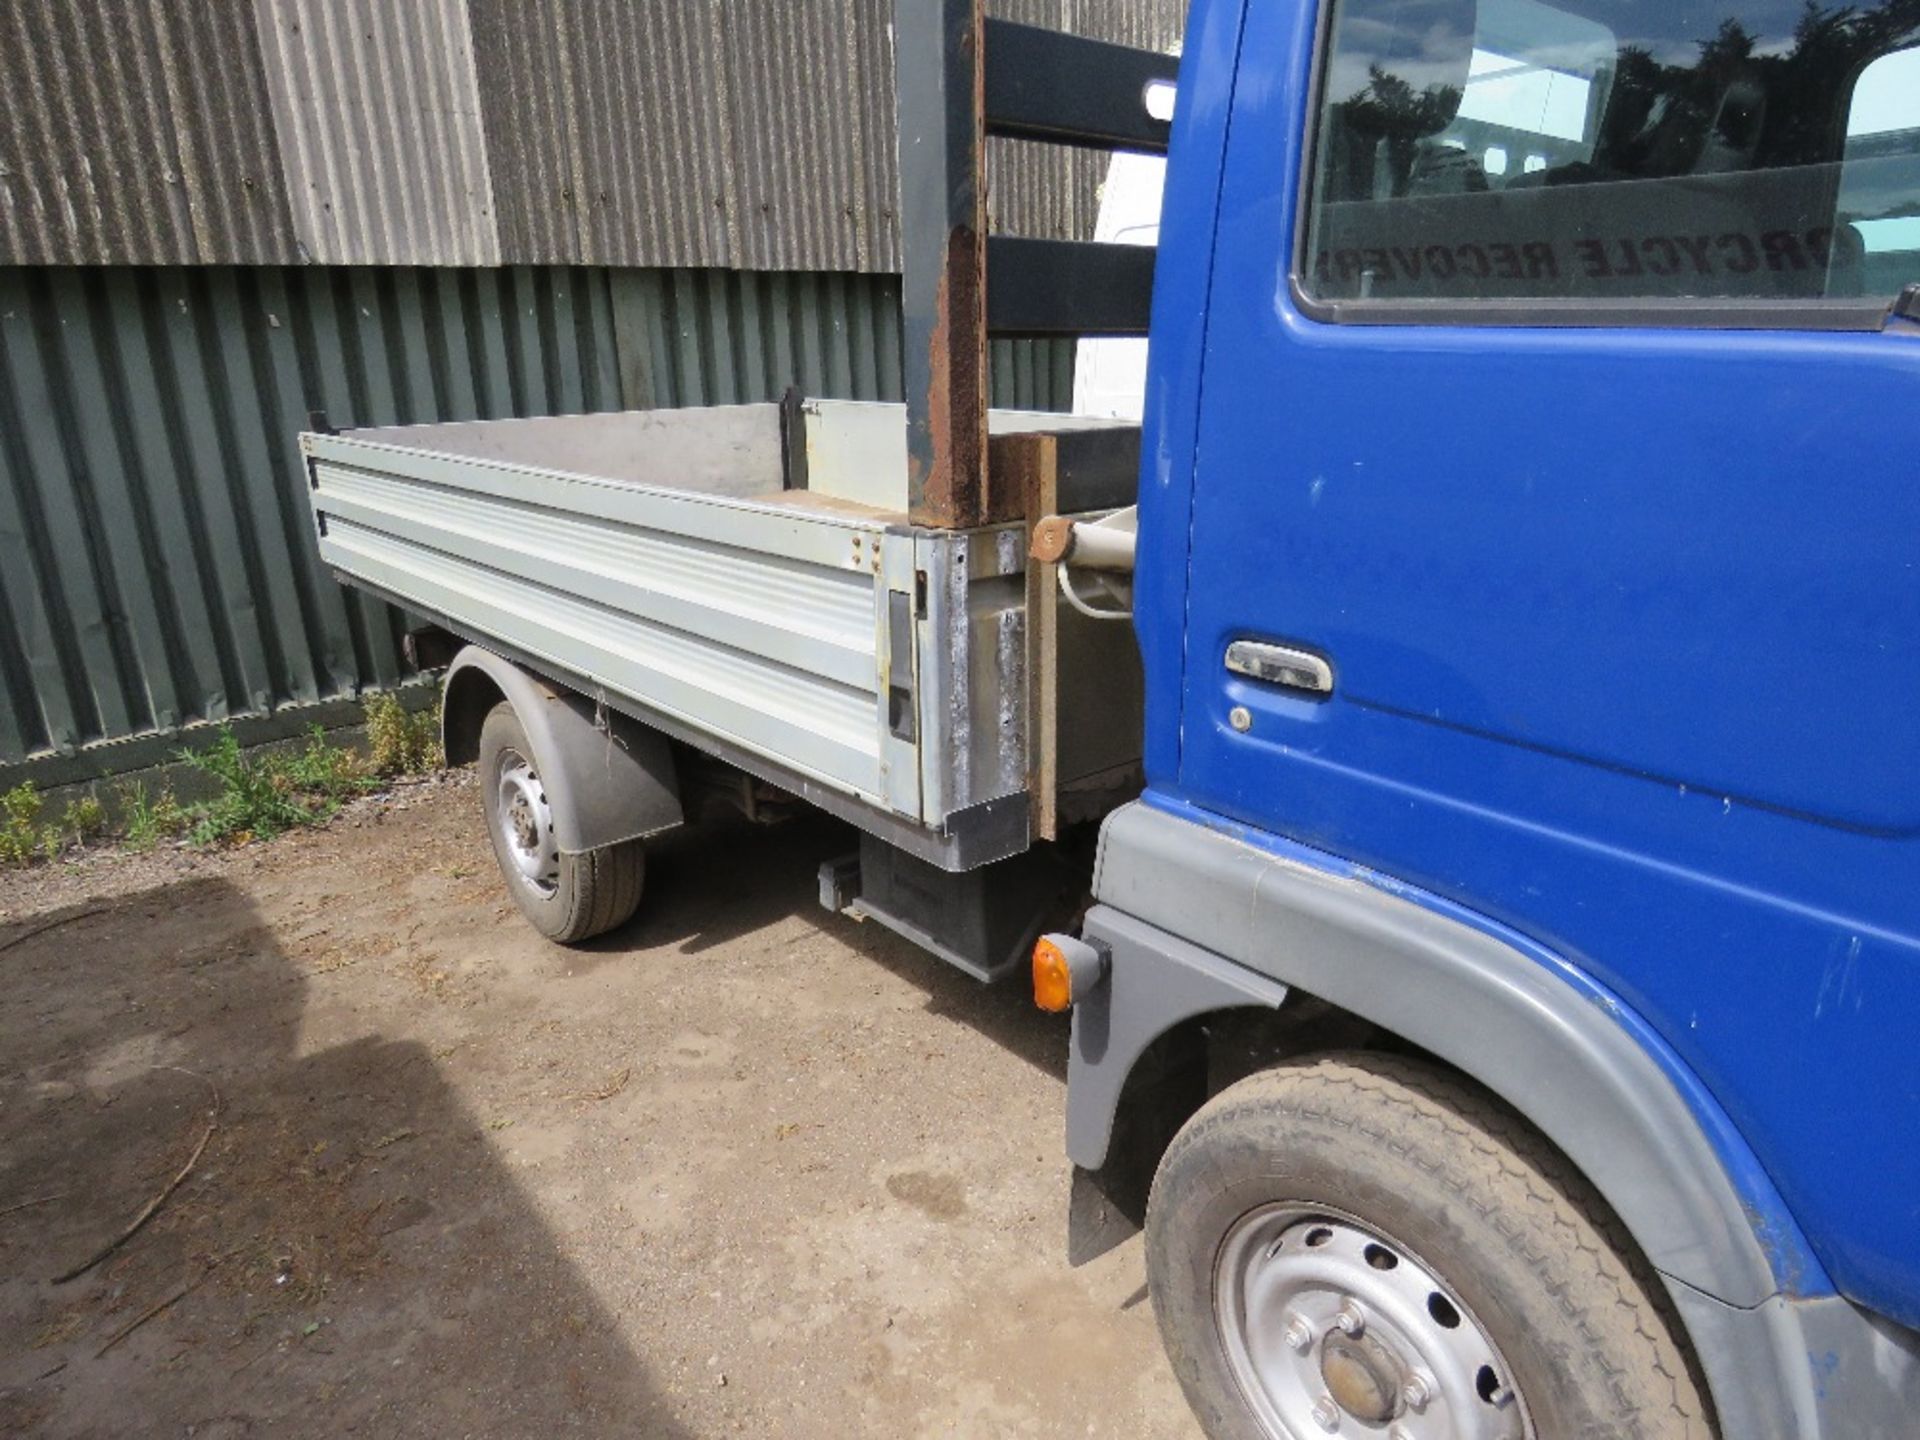 NISSAN CABSTAR DROP SIDE TRUCK TESTED TILL MARCH 2021 REG:AY55 YBX. WHEN TESTED WAS SEEN TO DRIVE, - Image 2 of 5